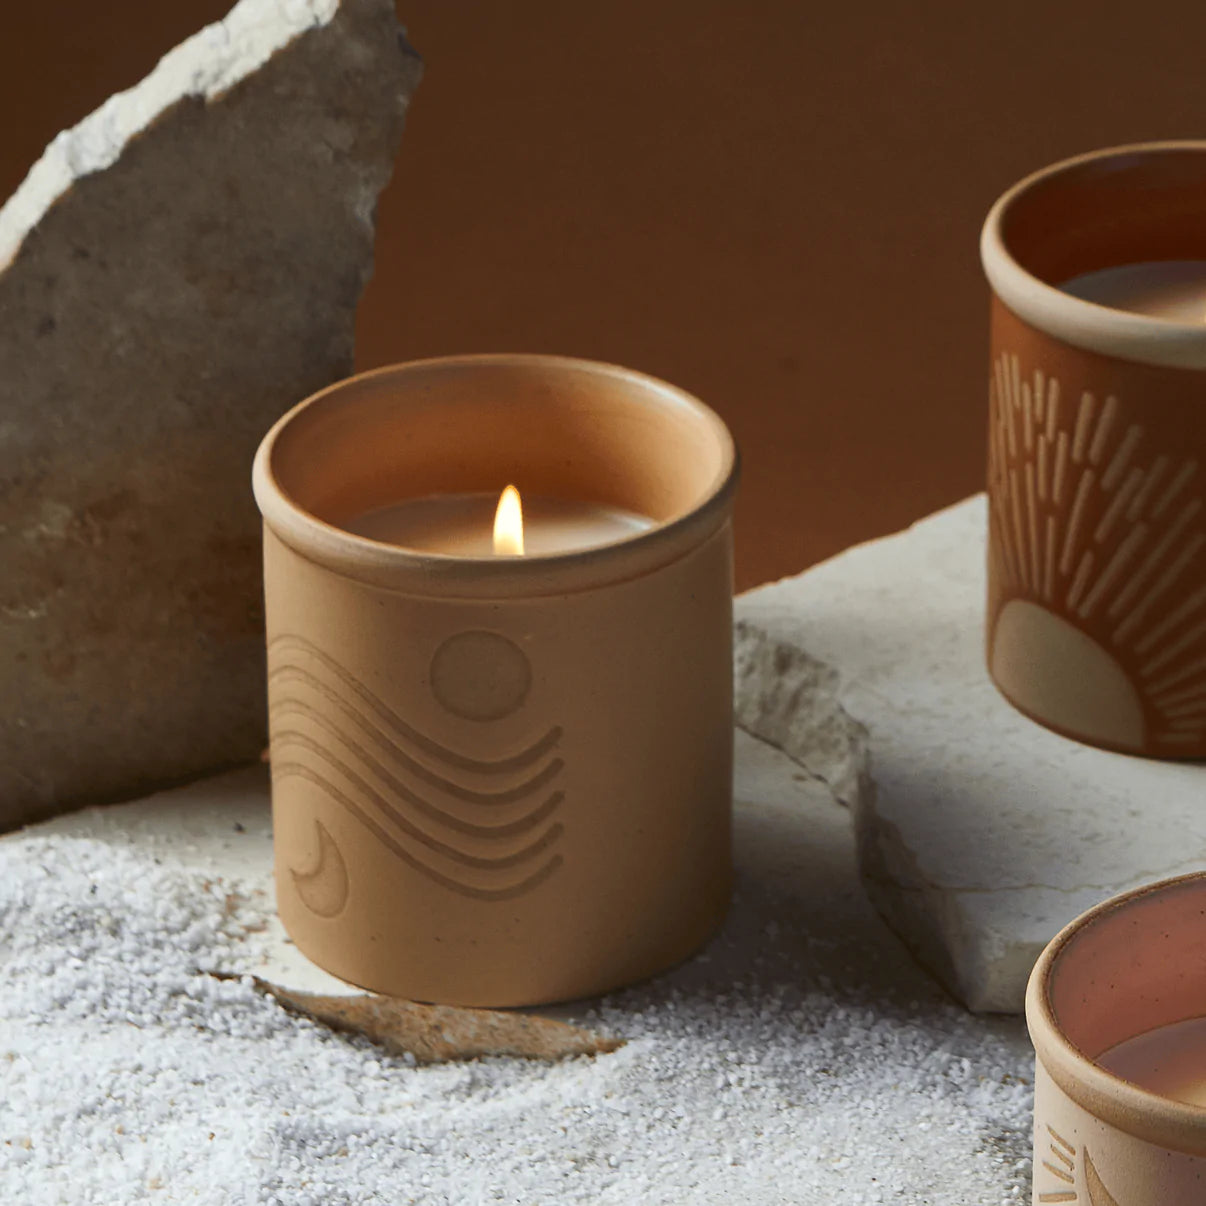 The Dune Candle